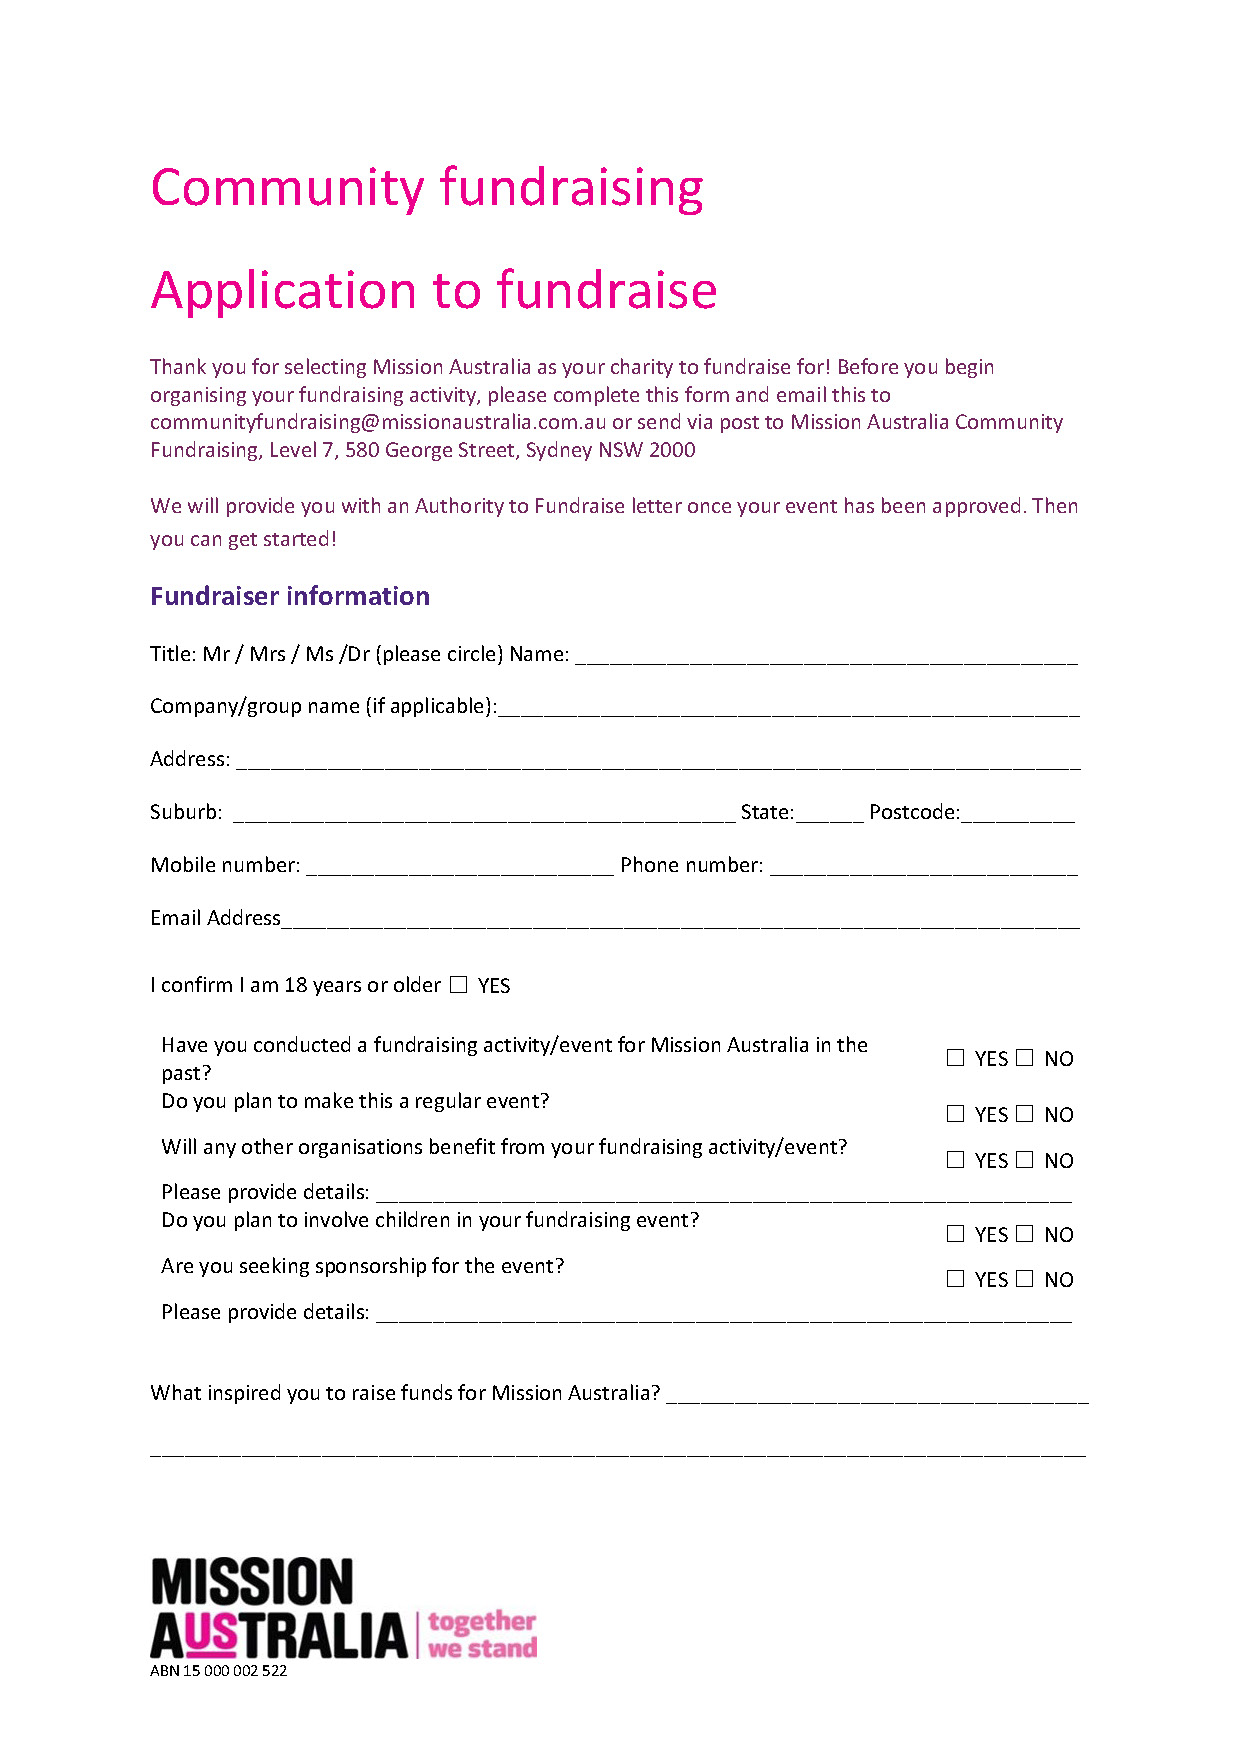 Application to Fundraise 2021